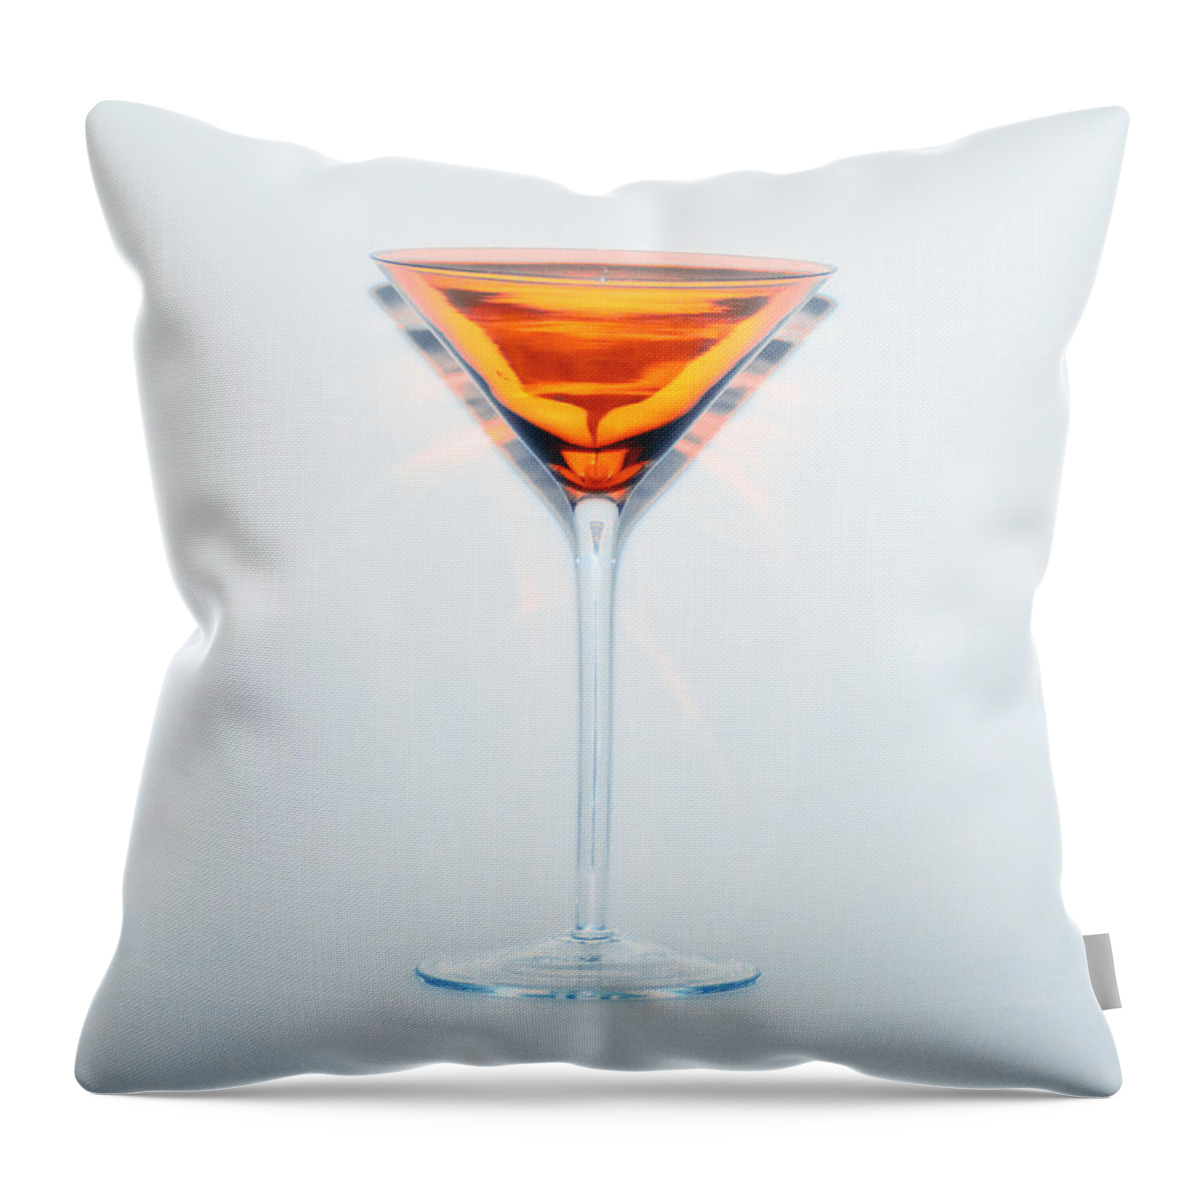 Nightcap Throw Pillow featuring the photograph Nightcap by Bill Cannon